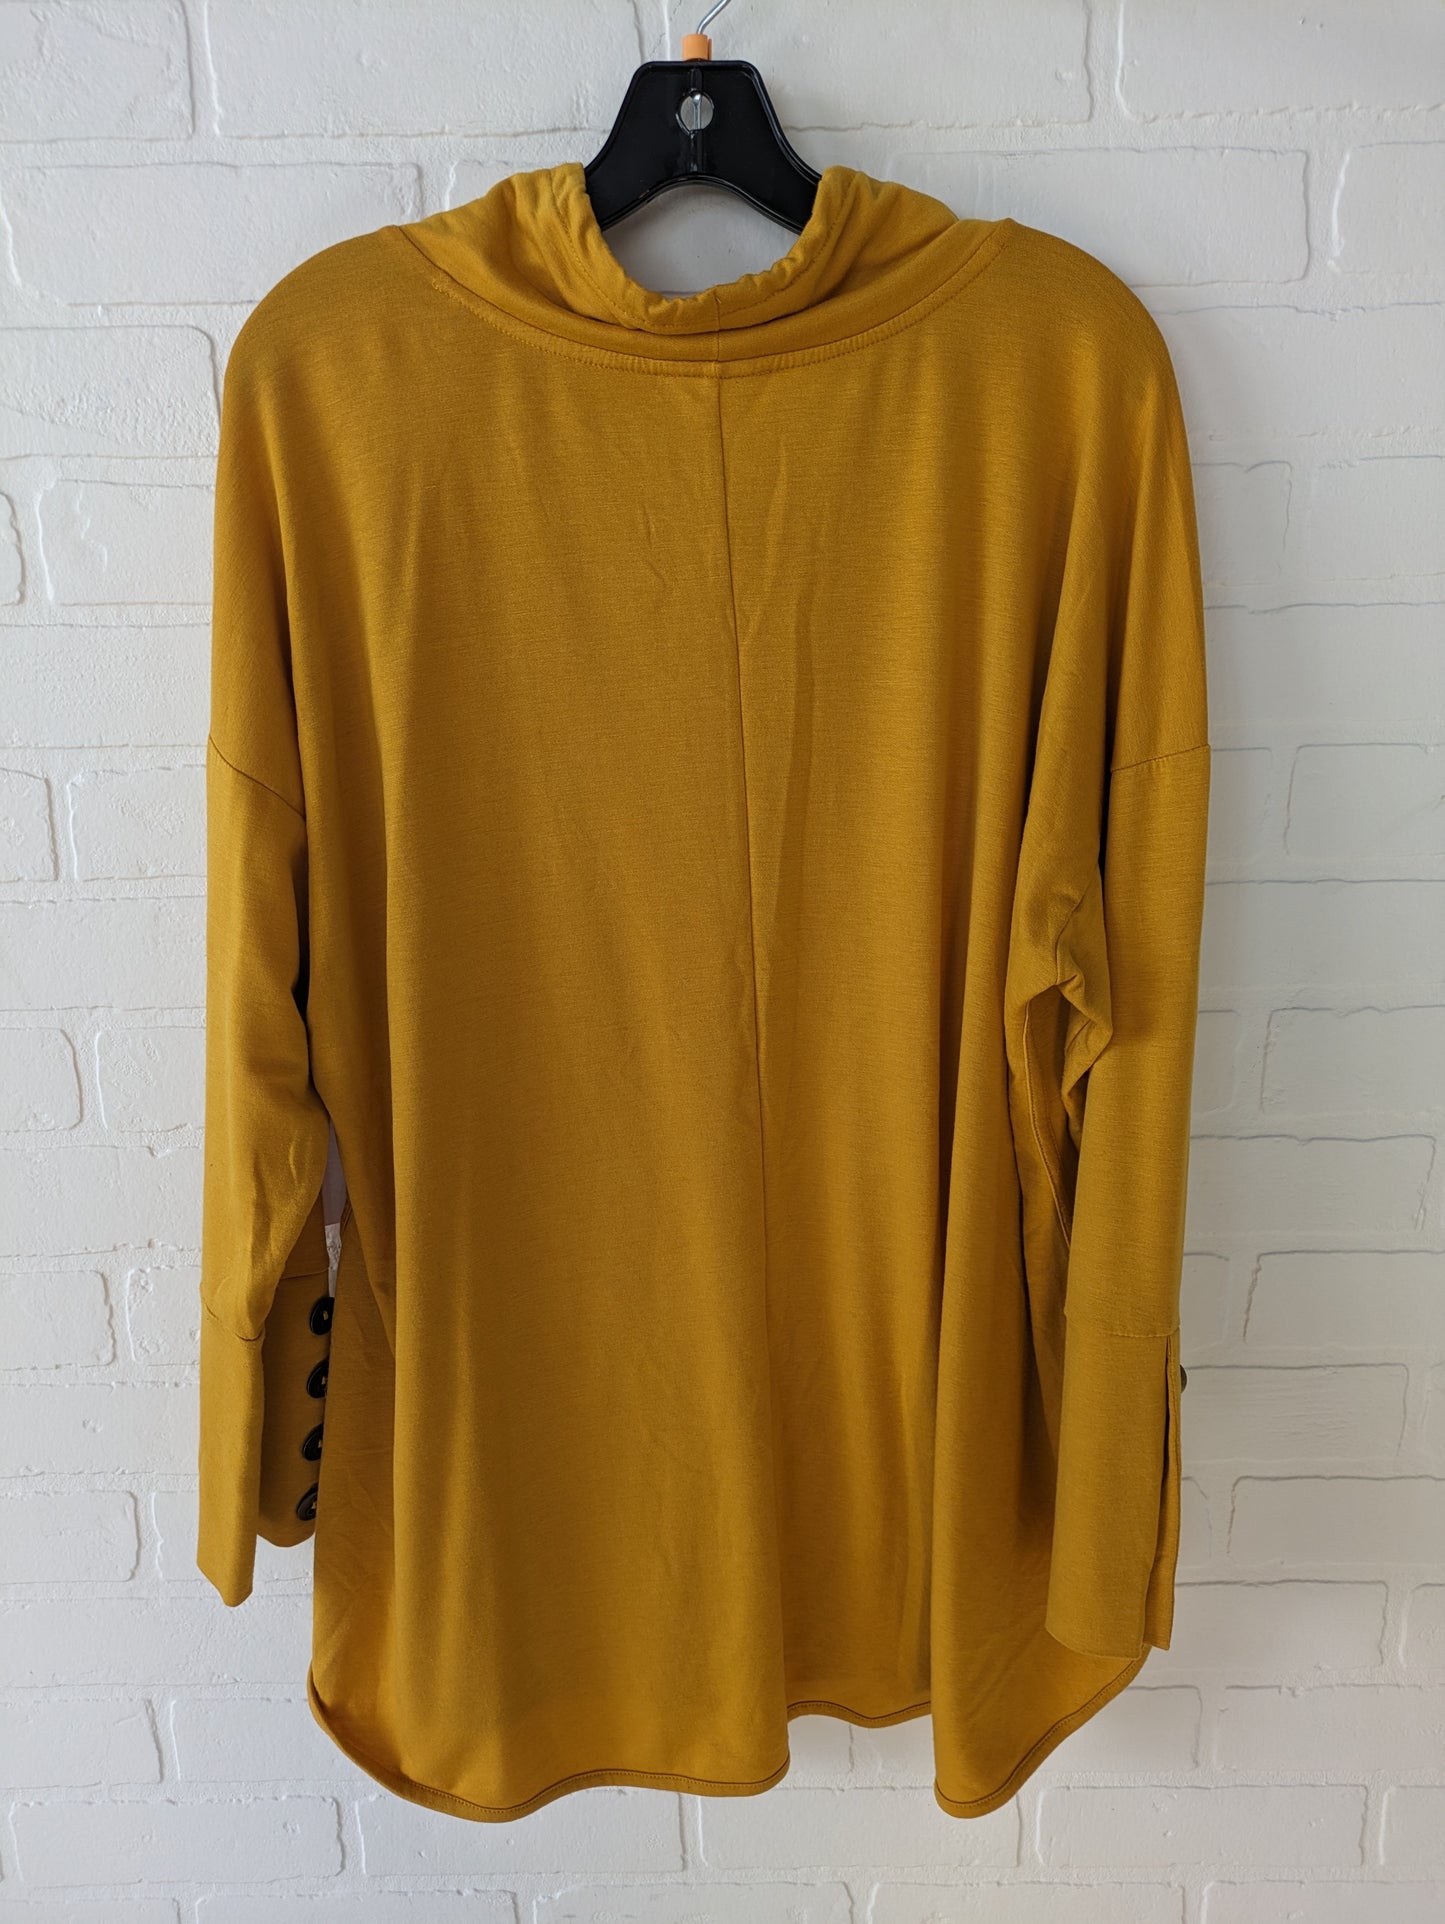 Tunic Long Sleeve By West Bound  Size: 1x